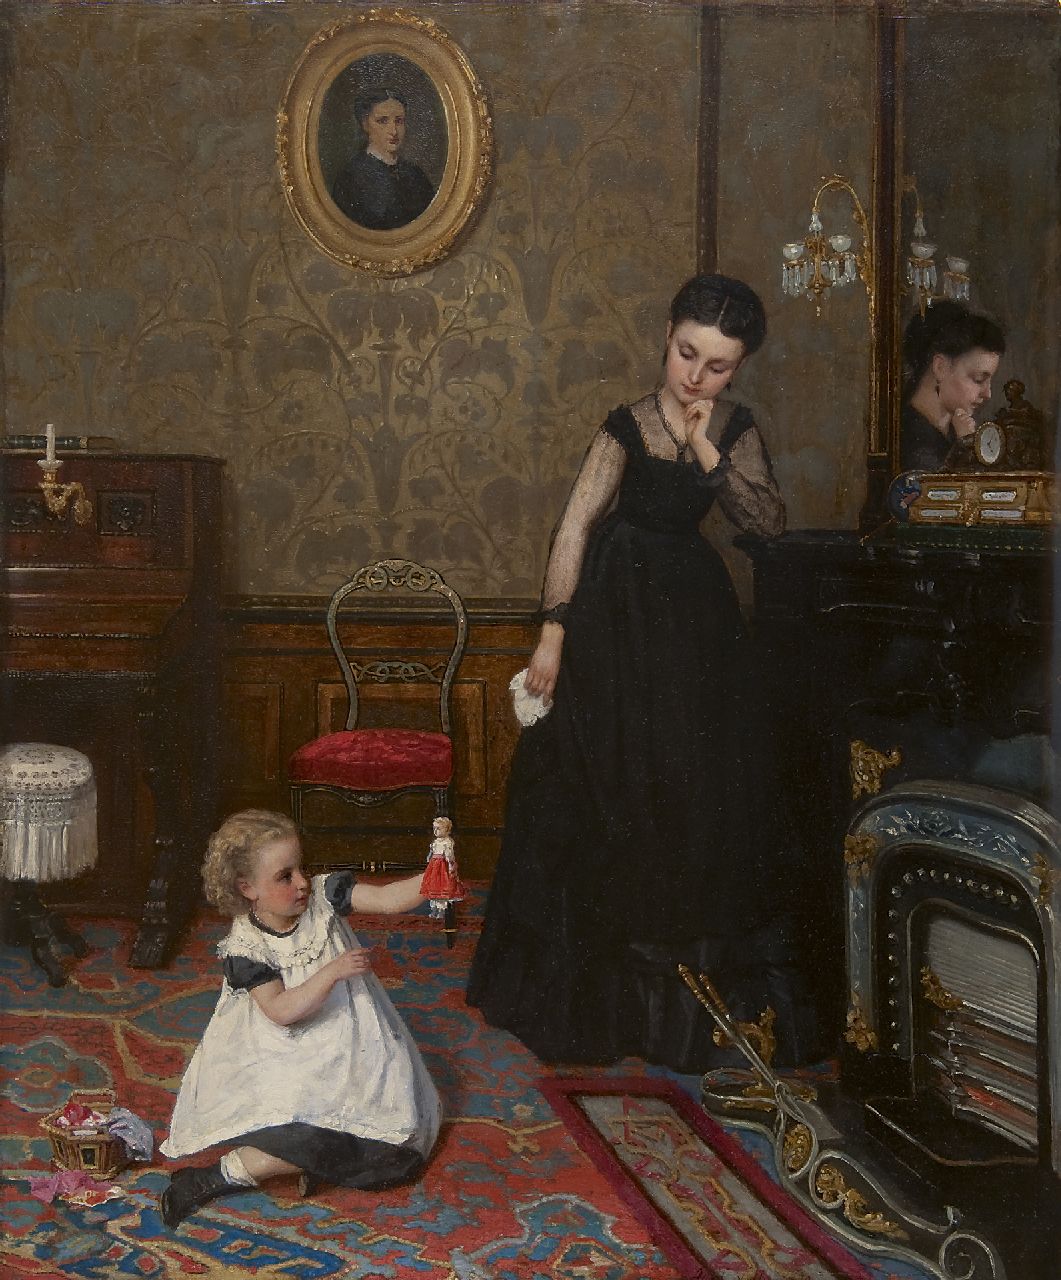 Neuhuys J.A.  | Johannes 'Albert' Neuhuys, Interior with mother and child, oil on panel 79.7 x 64.9 cm, signed l.r. and dated '70